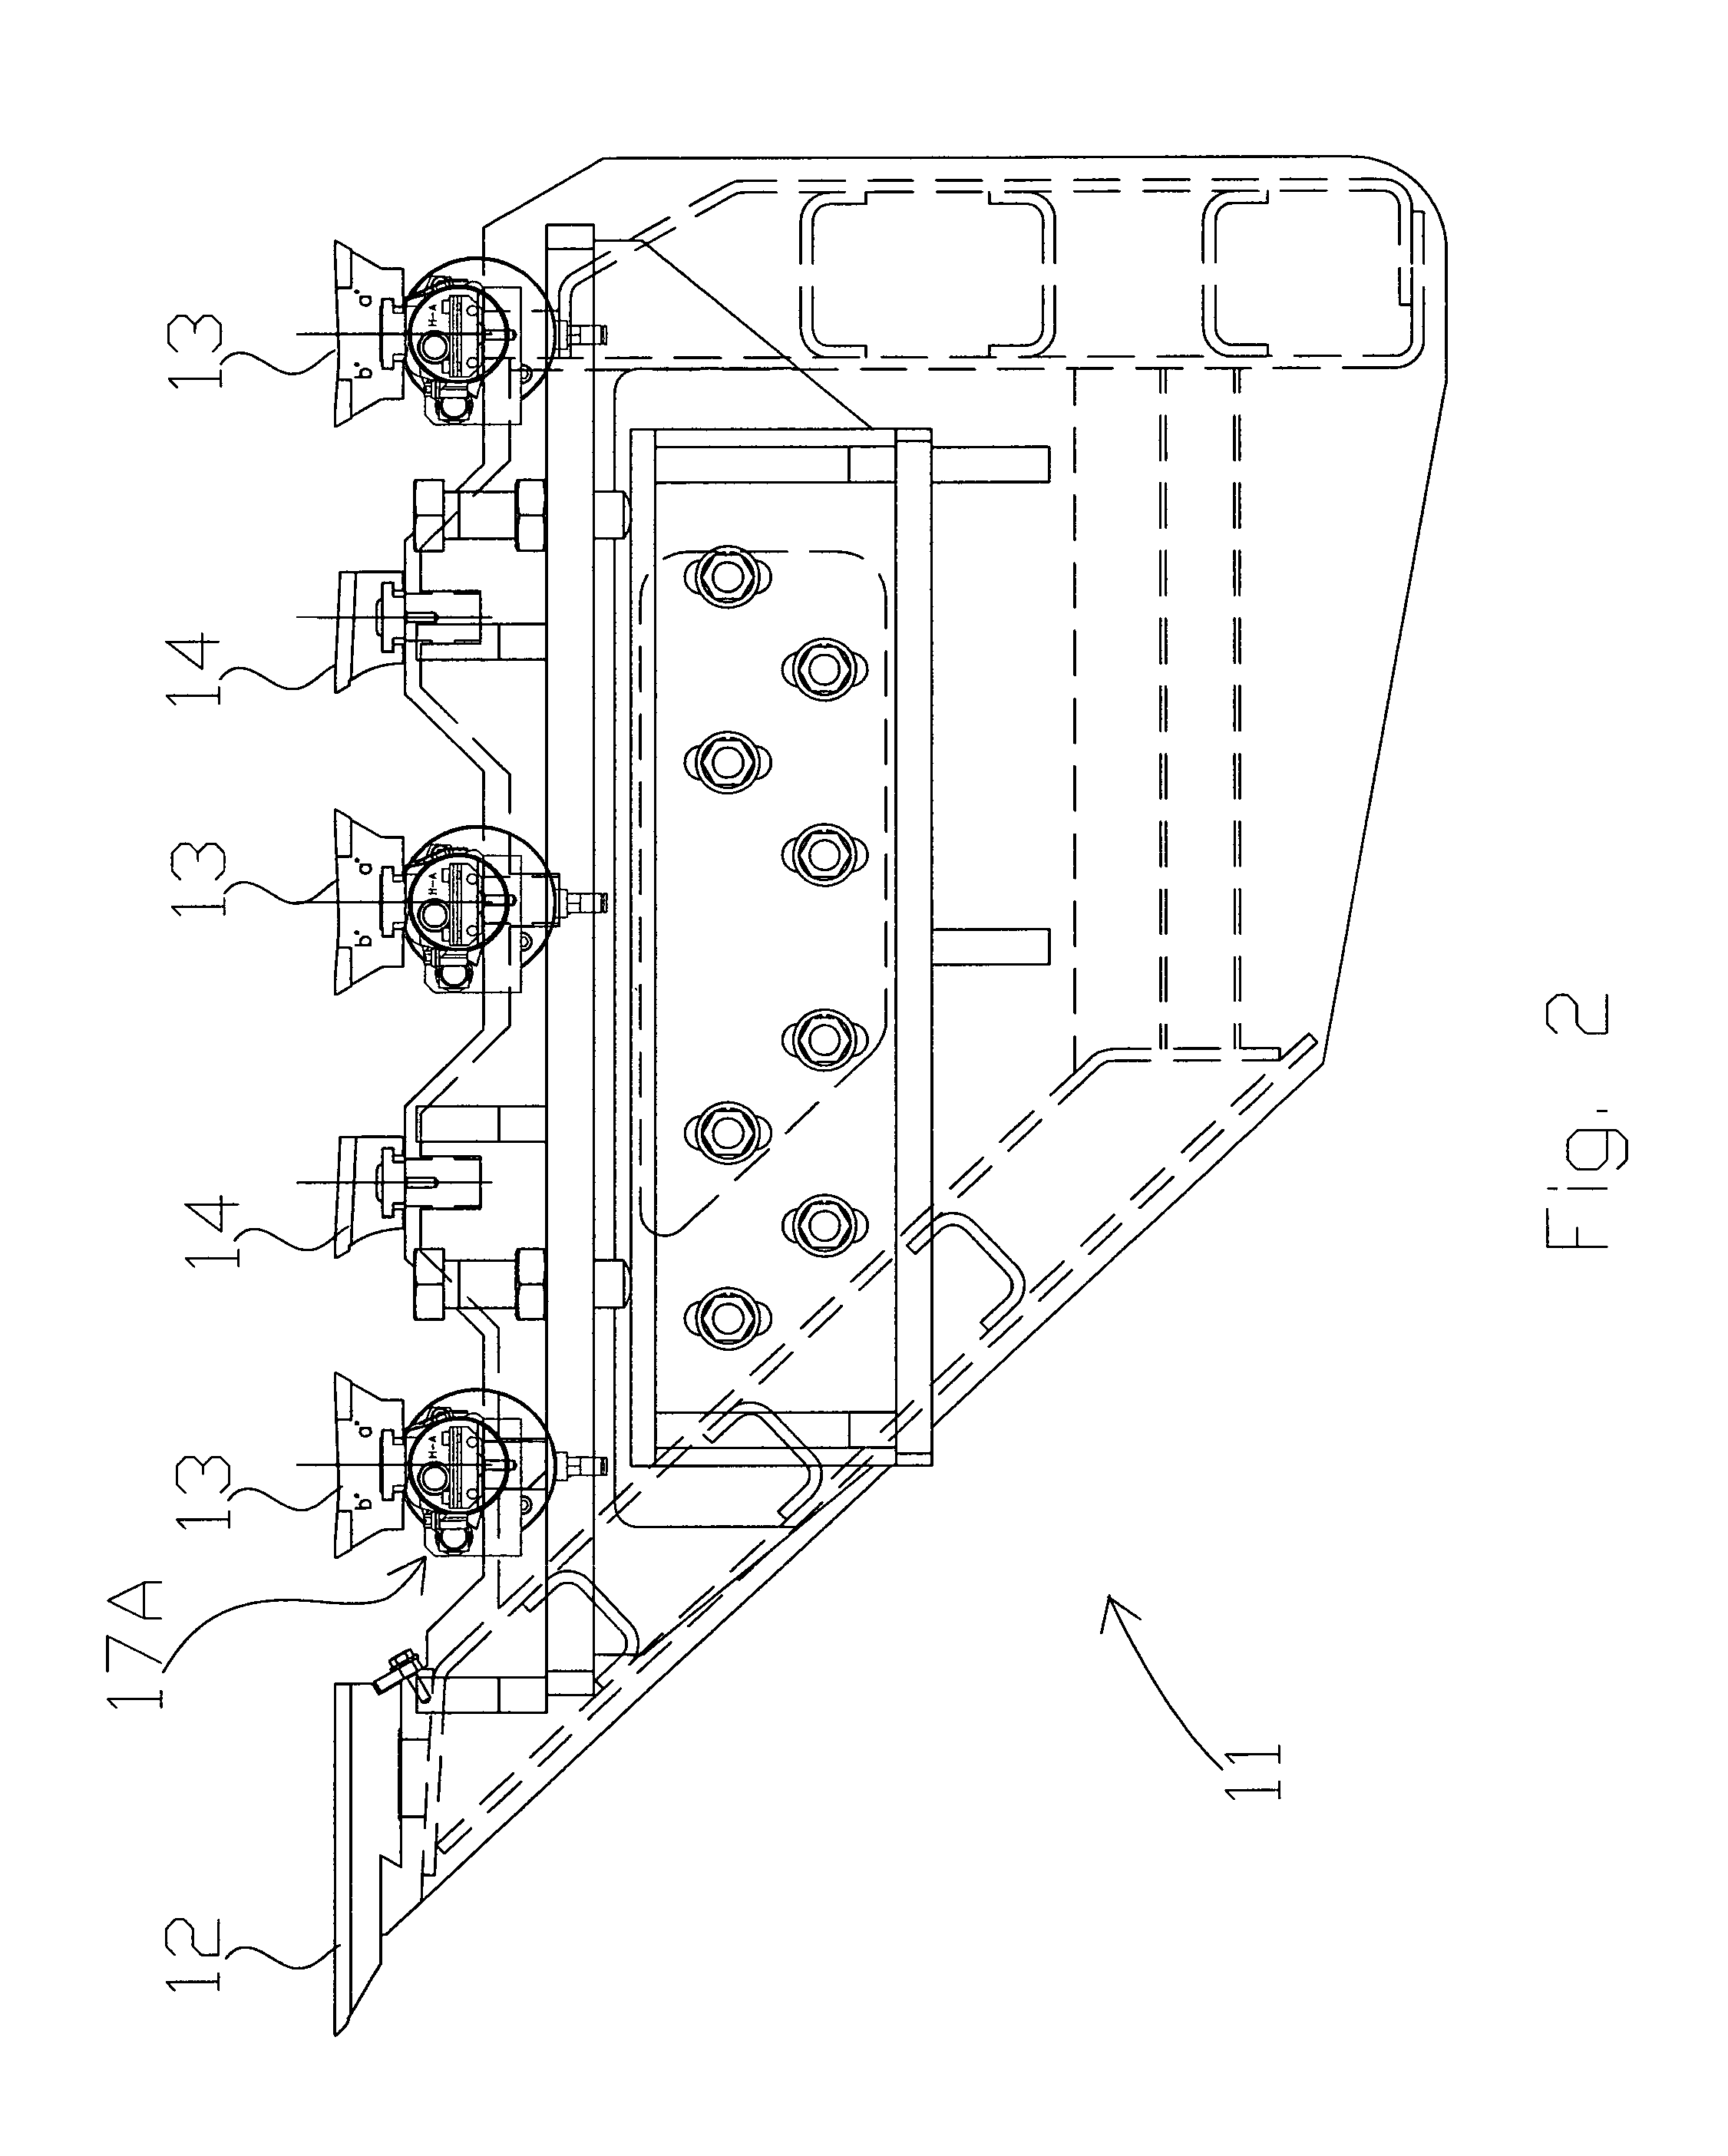 Method and machine for manufacturing paper products using Fourdrinier forming